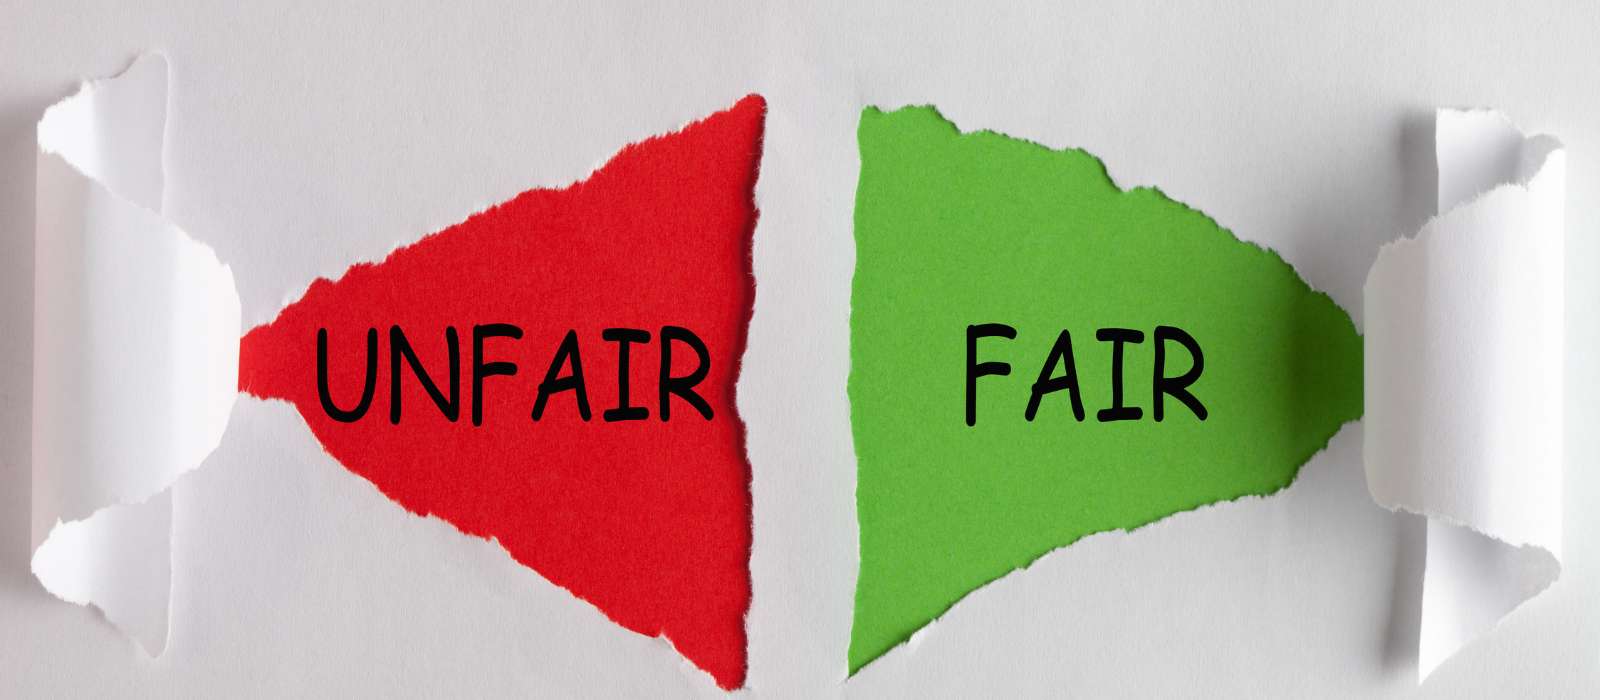 Fairness is the true equality